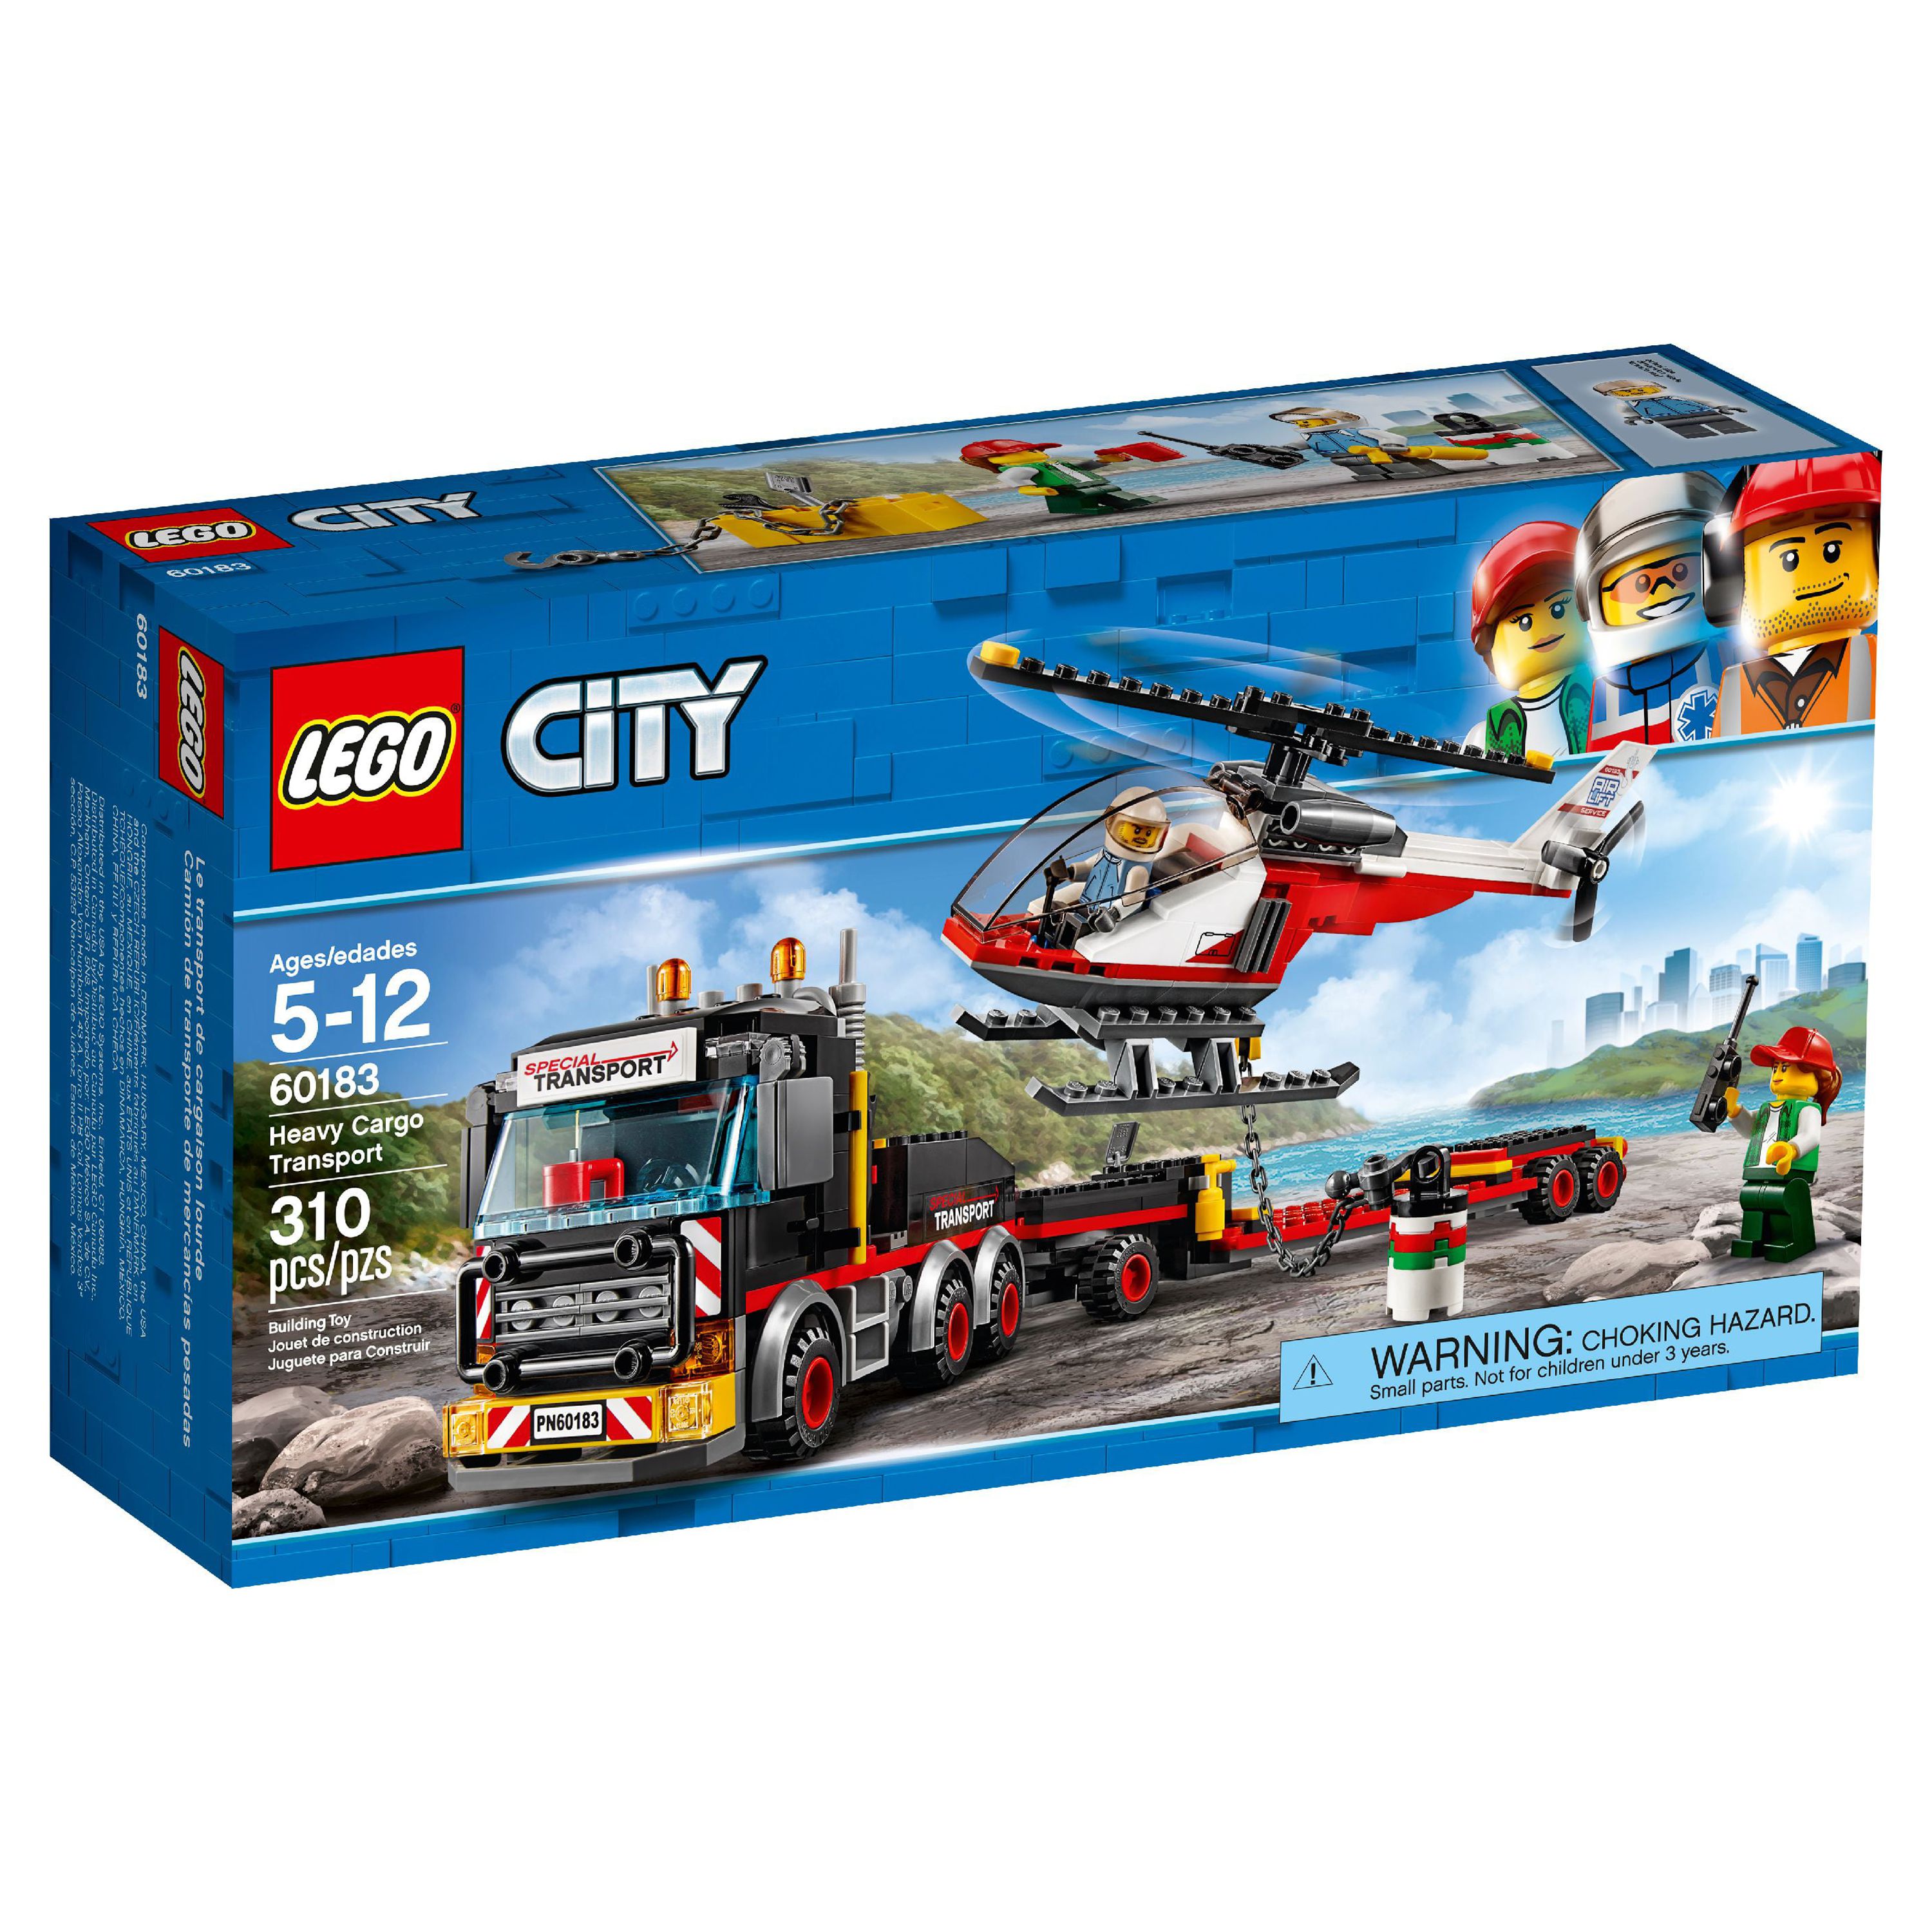 Lego City Heavy Cargo Transport 60183 Toy Truck Building Kit - image 4 of 7